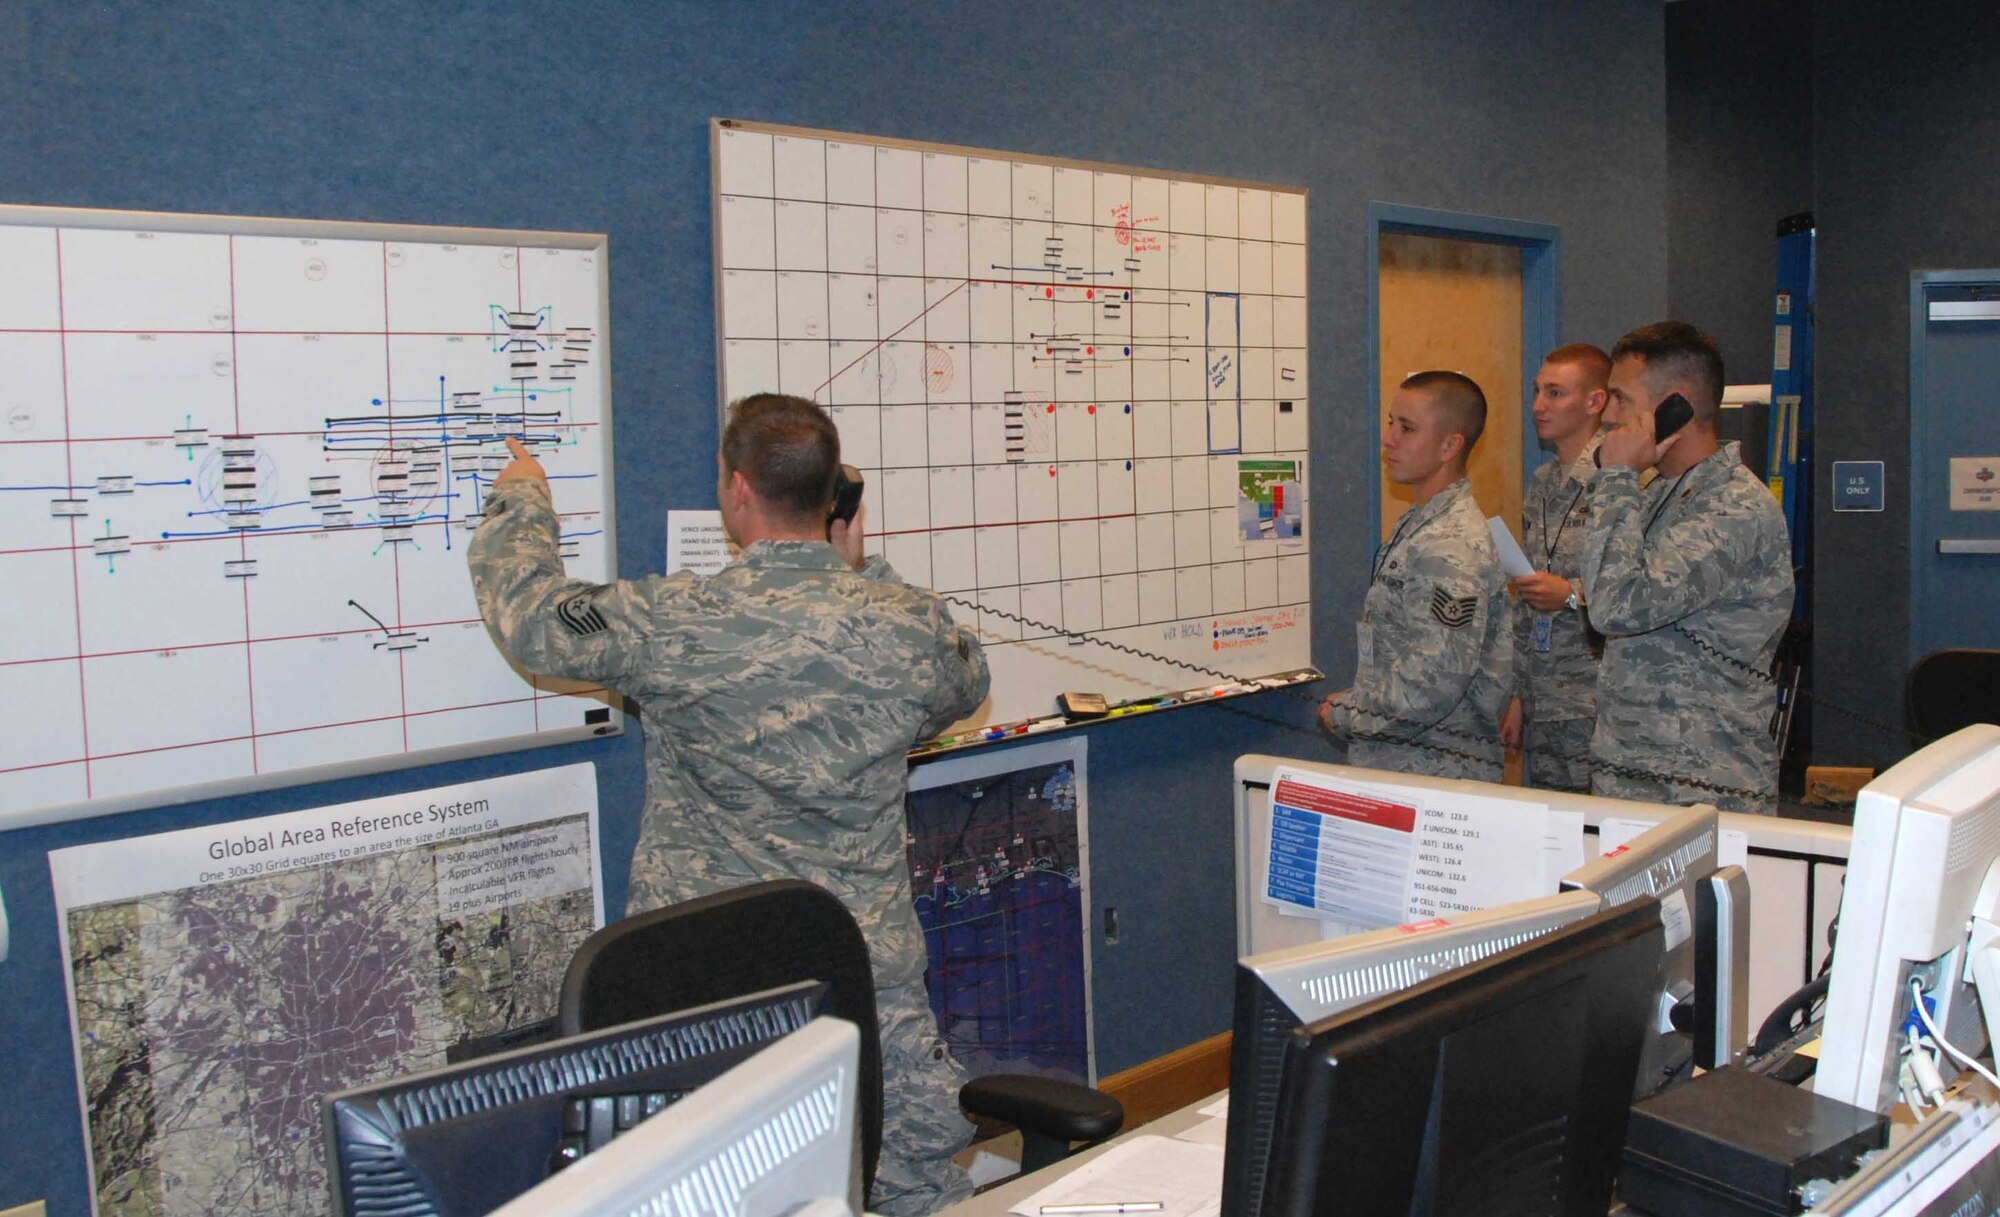 From left:  Tech. Sgt. Edward Noel, Tech. Sgt. Charles Holbert, Staff Sgt. Troy Bame, and Maj. Dwayne Gray, Aviation Coordination Command airspace managers, work on air support schedules in response to the Deepwater Horizon clean-up efforts in the Gulf of Mexico.